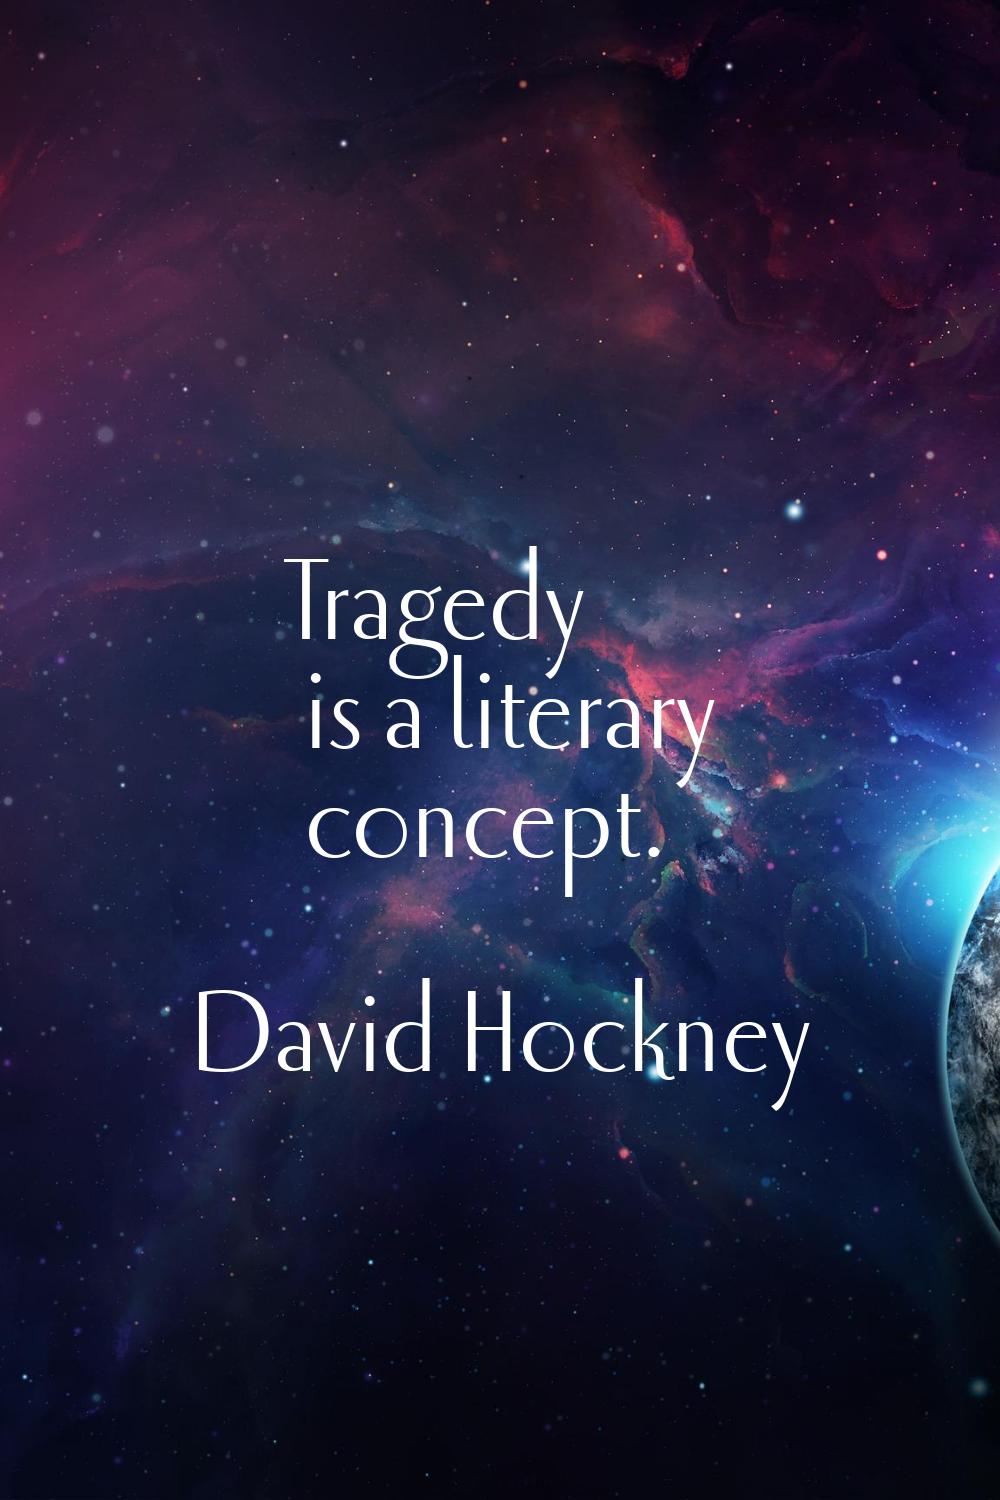 Tragedy is a literary concept.